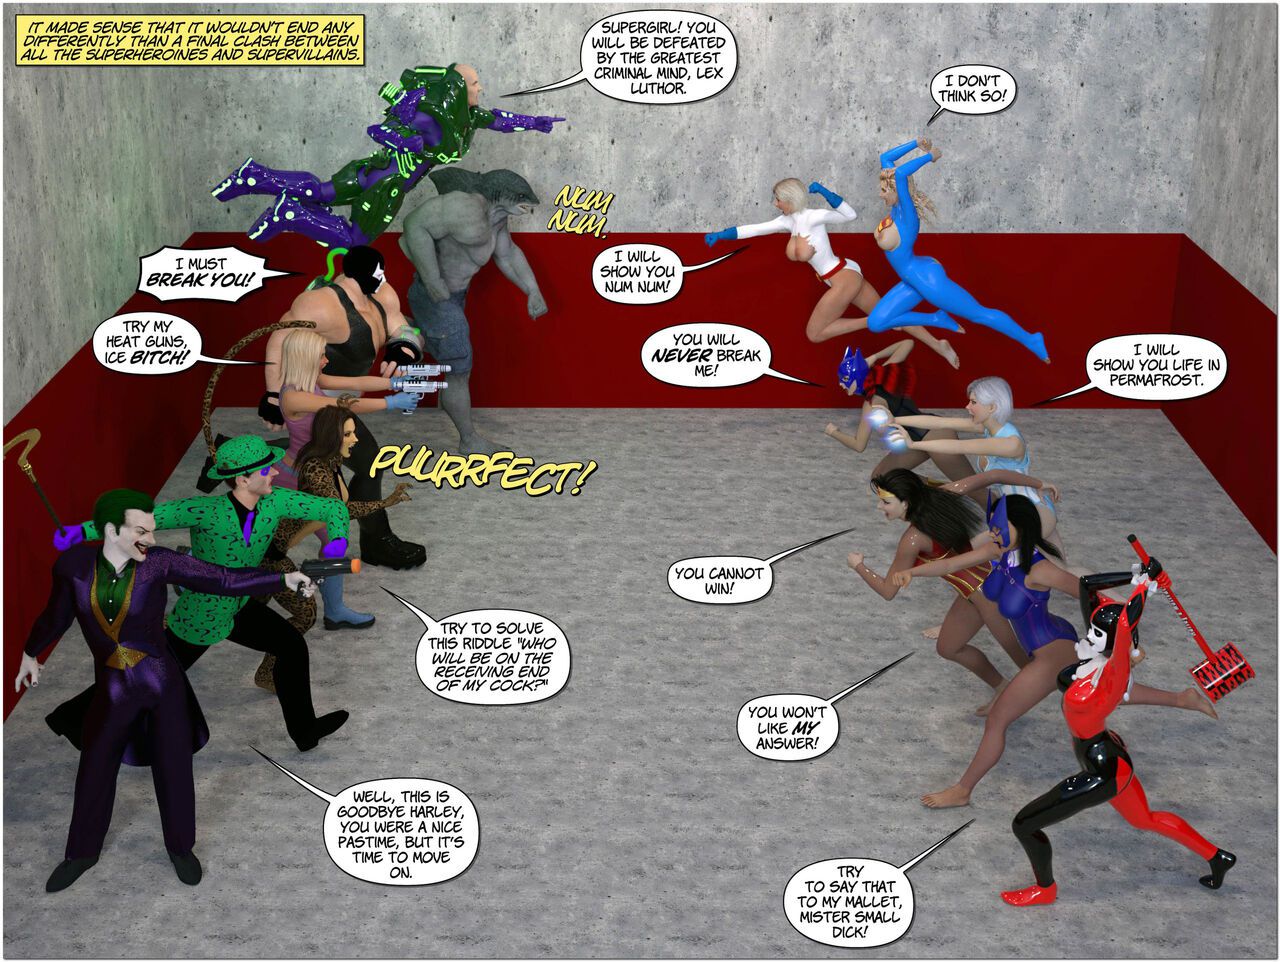 [DBComix] New Arkham For Superheroines 17 - The Last Party 60